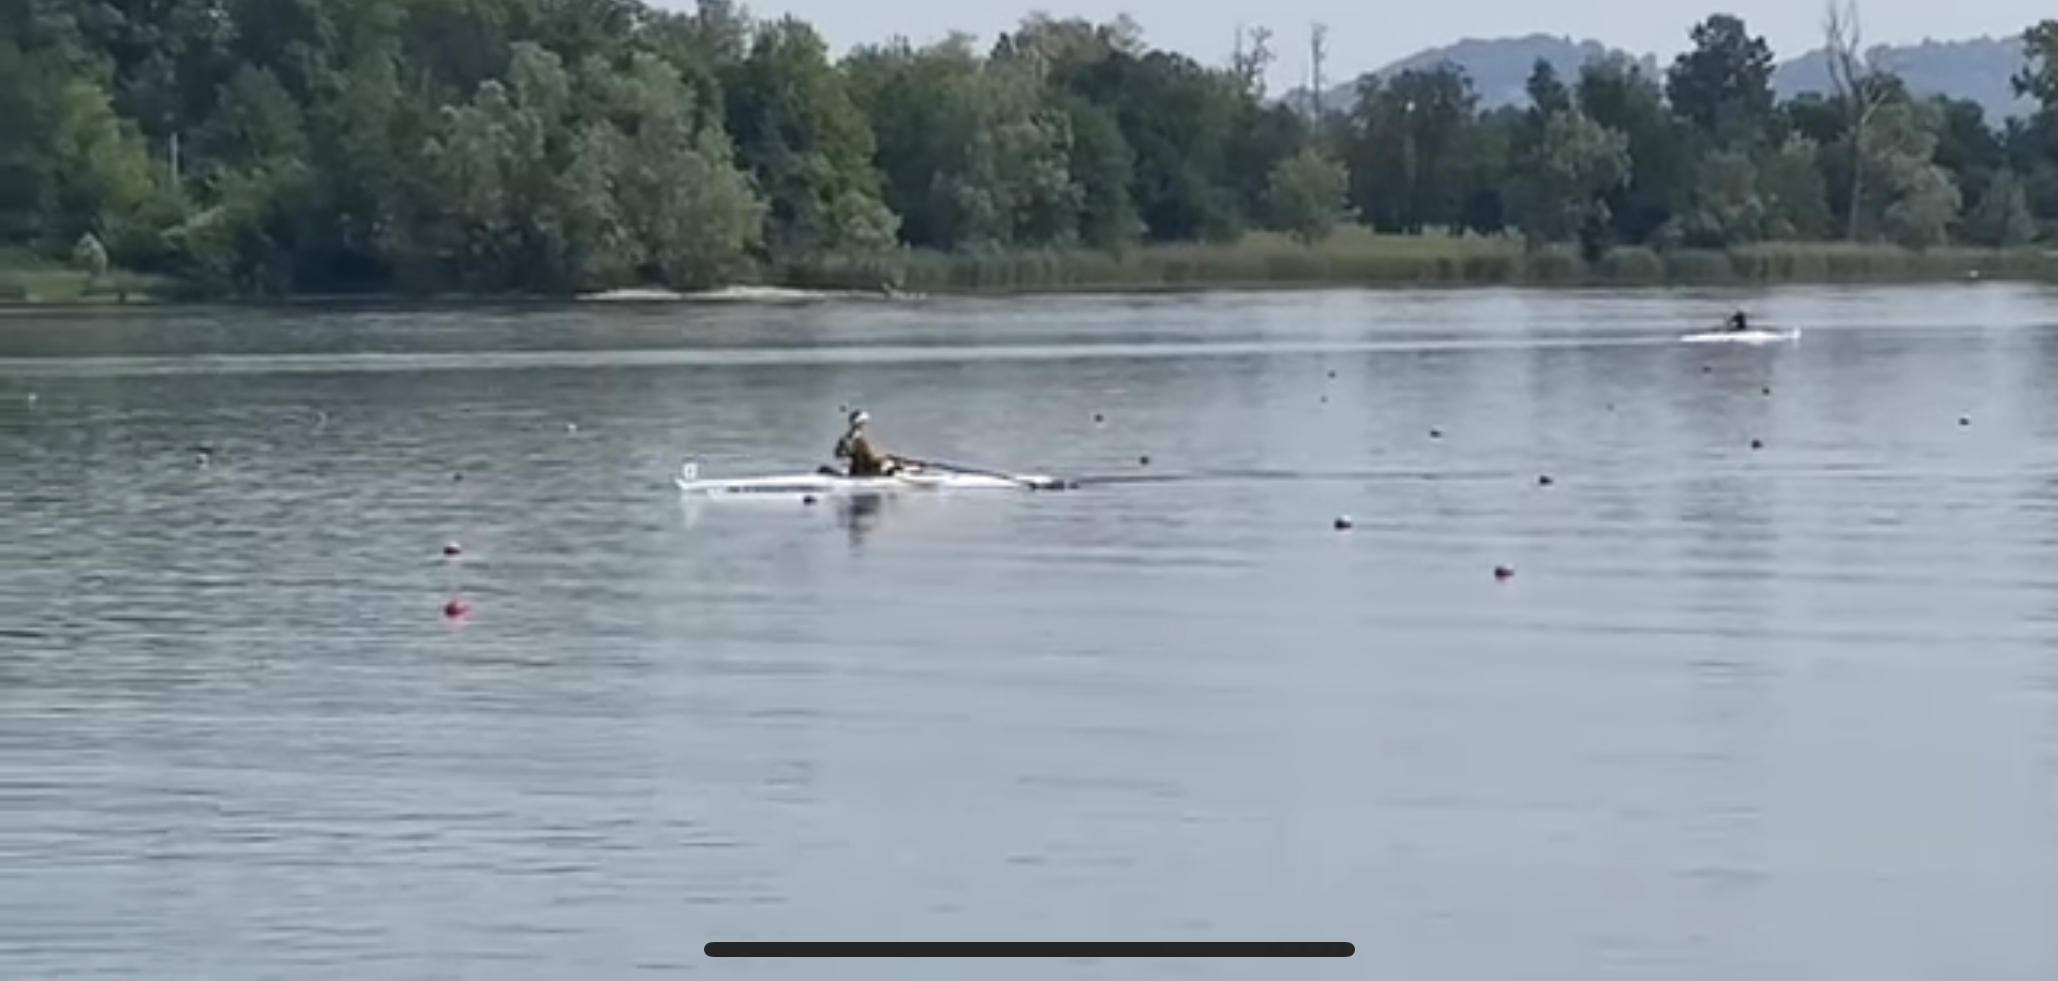 A rower on the lake rowing